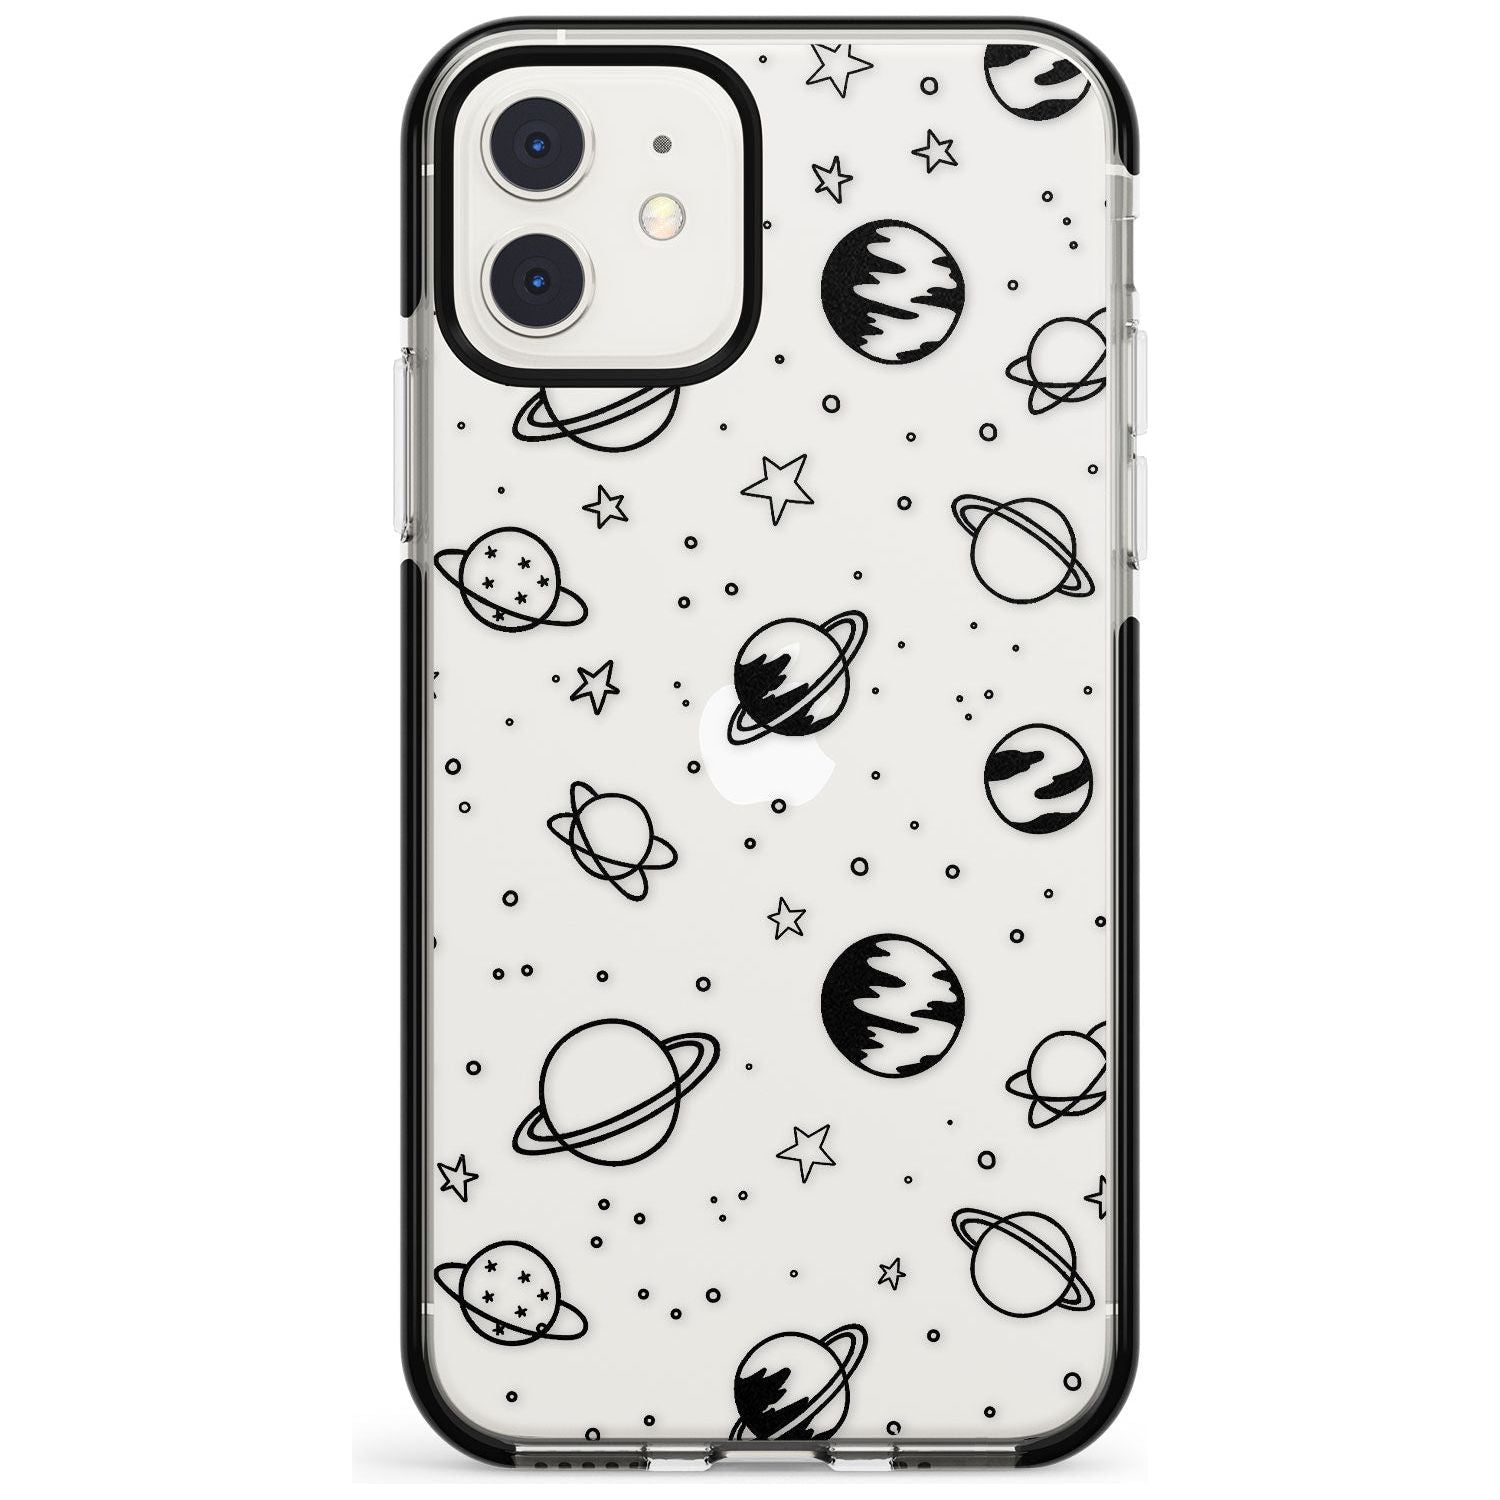 Outer Space Outlines: Black on Clear Pink Fade Impact Phone Case for iPhone 11 Pro Max